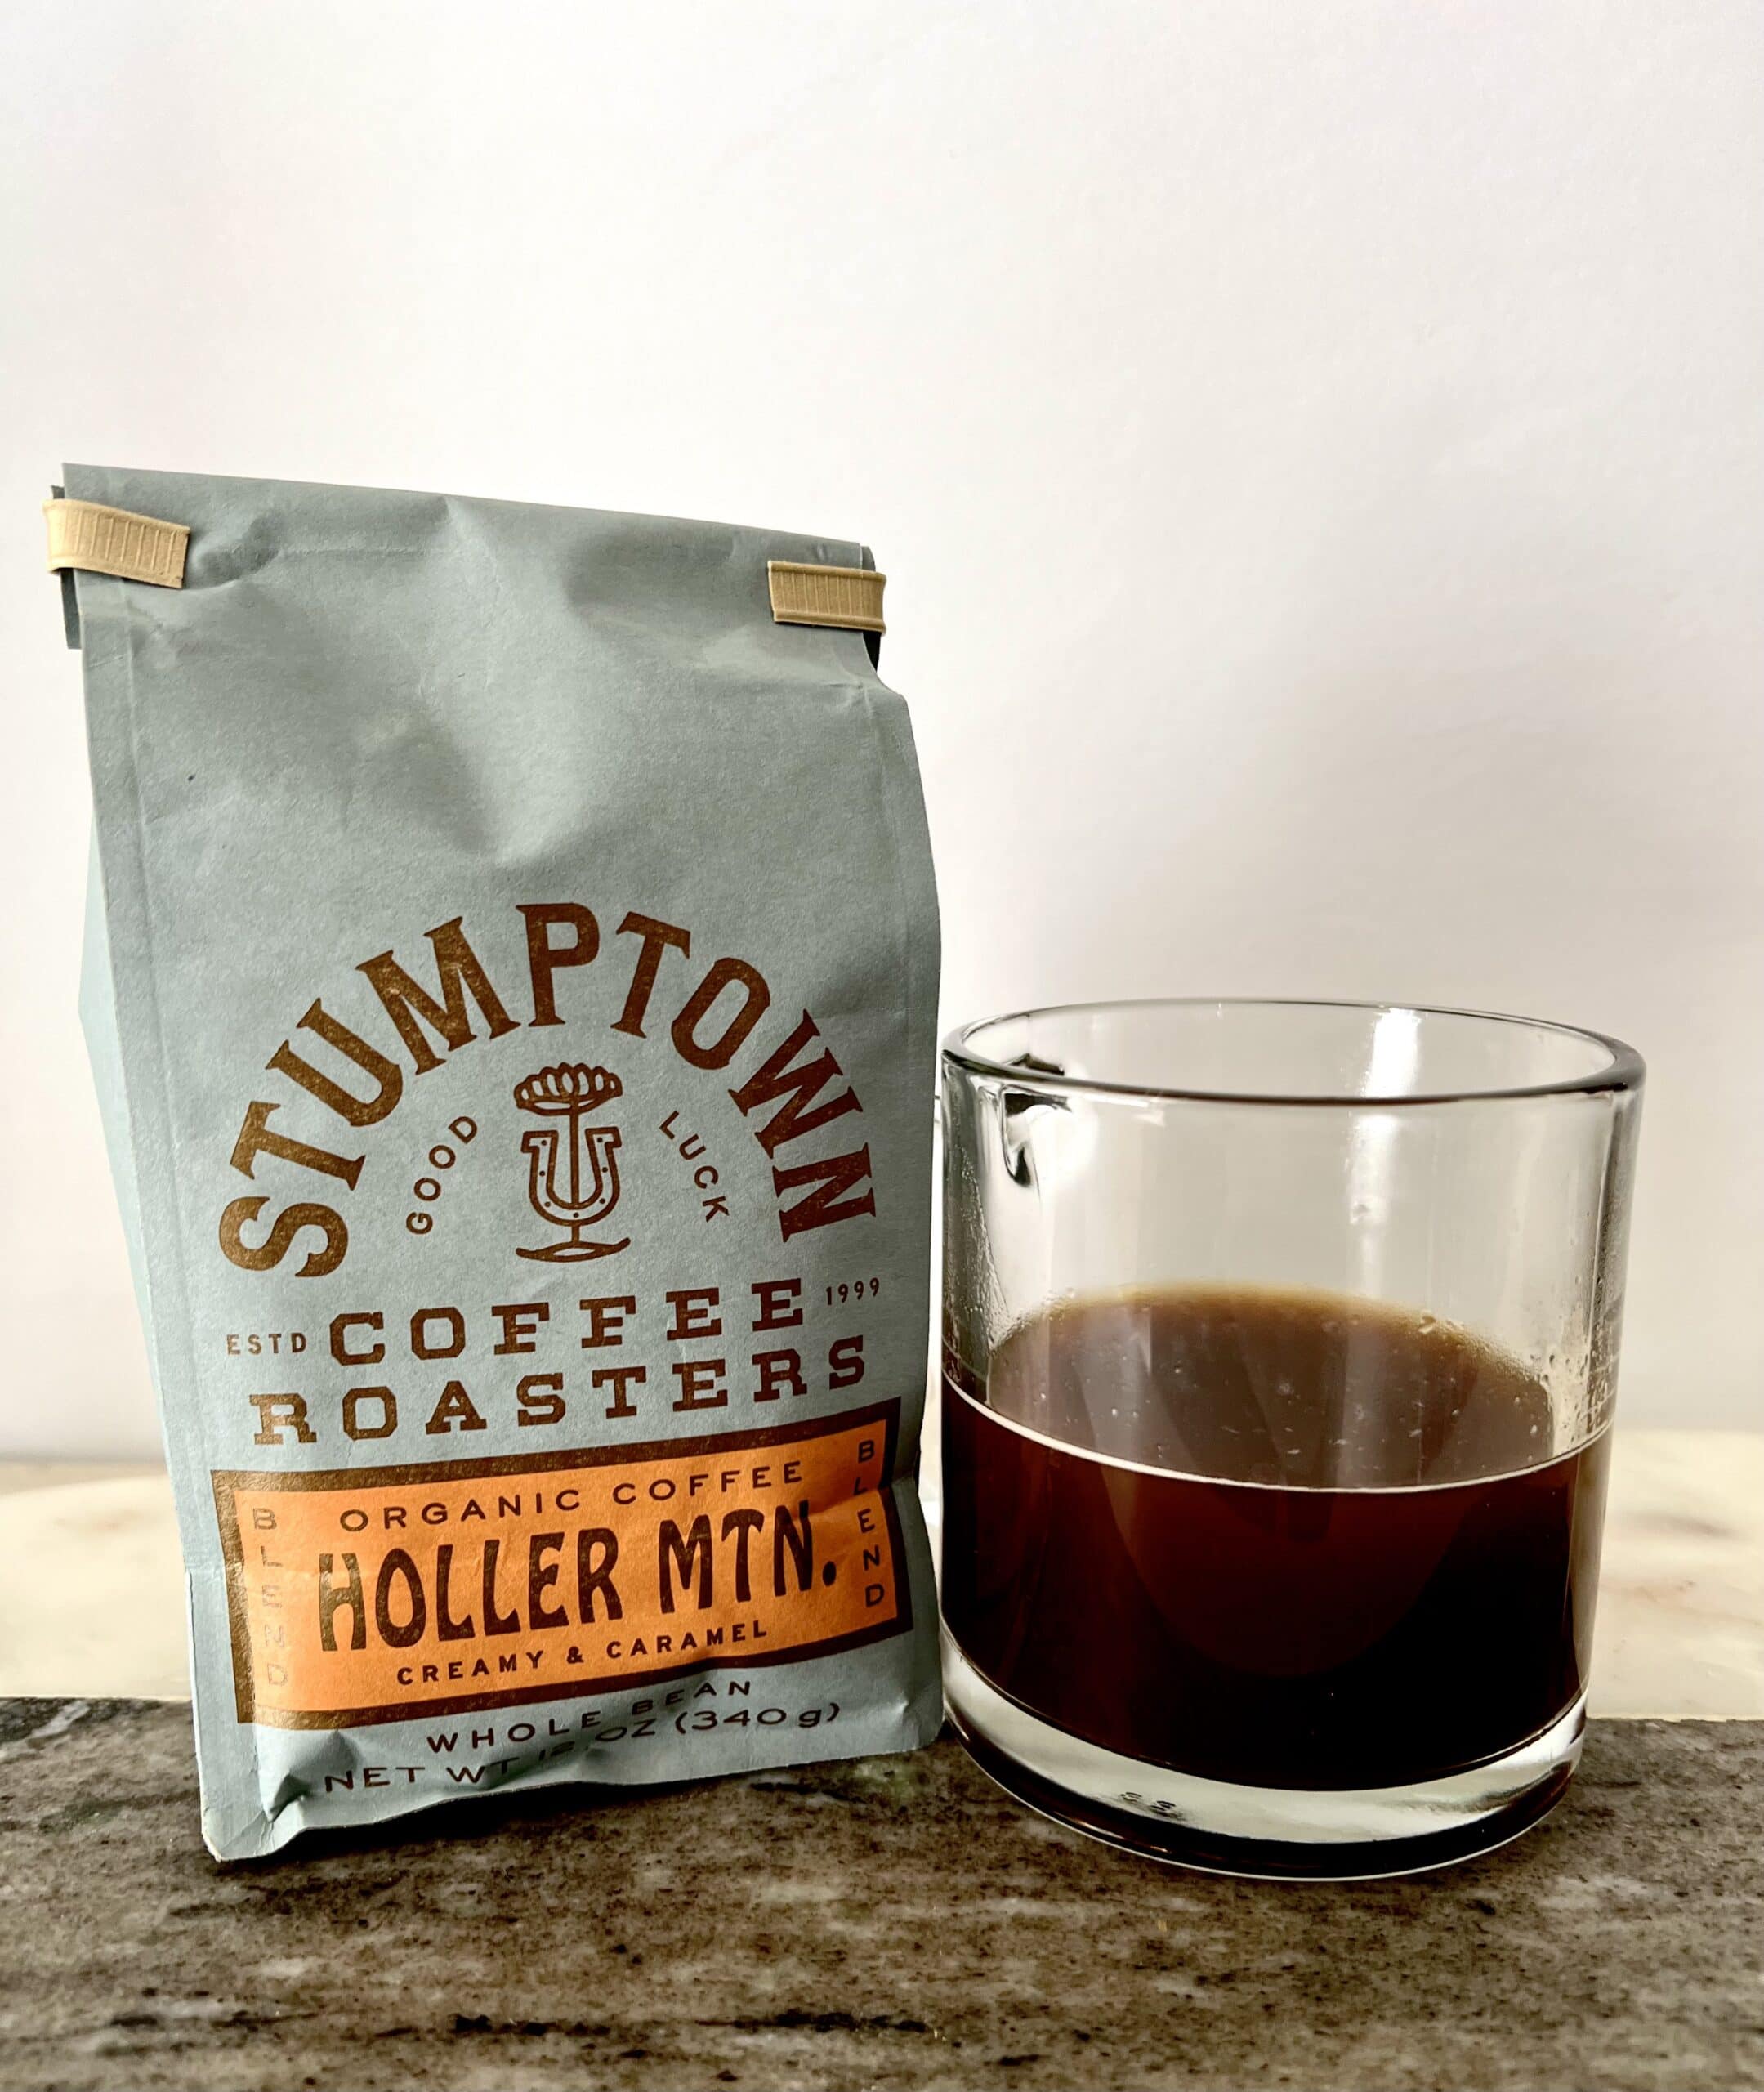 a package of Holler Mountain coffee stands next to a cup of coffee